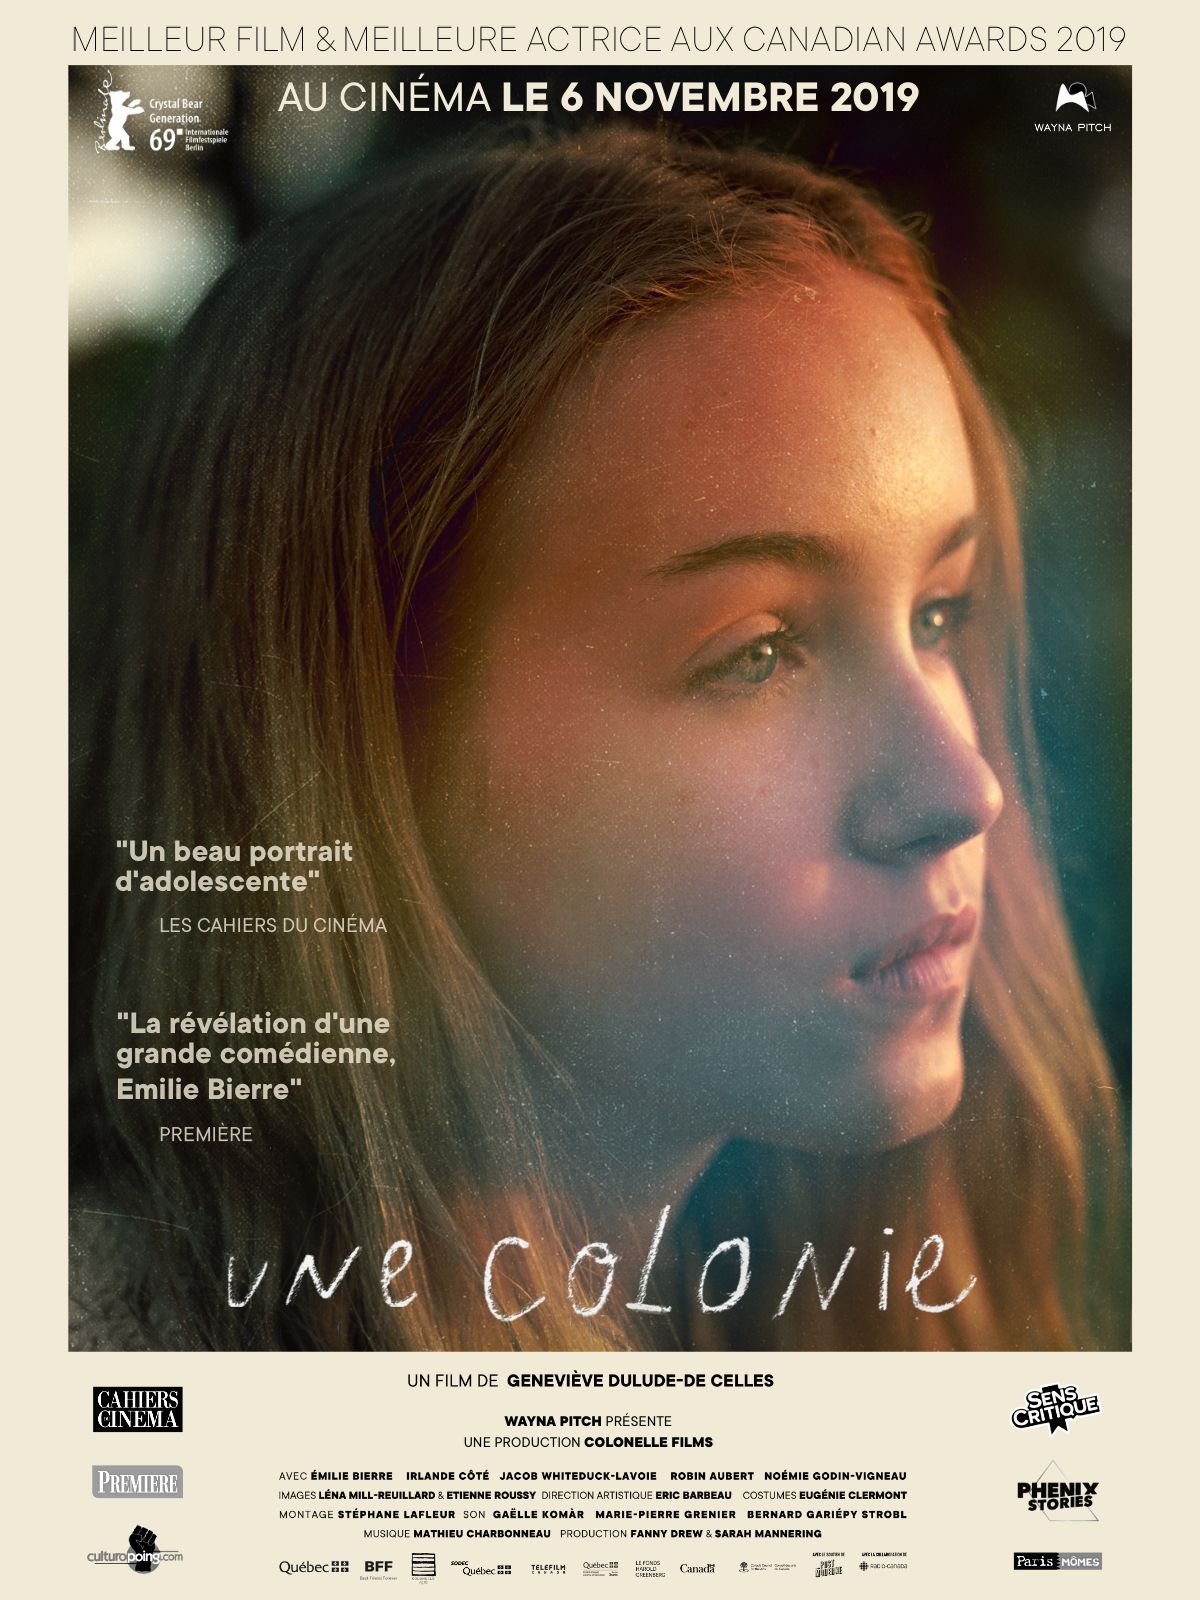 Une colonie - Film (2019) streaming VF gratuit complet